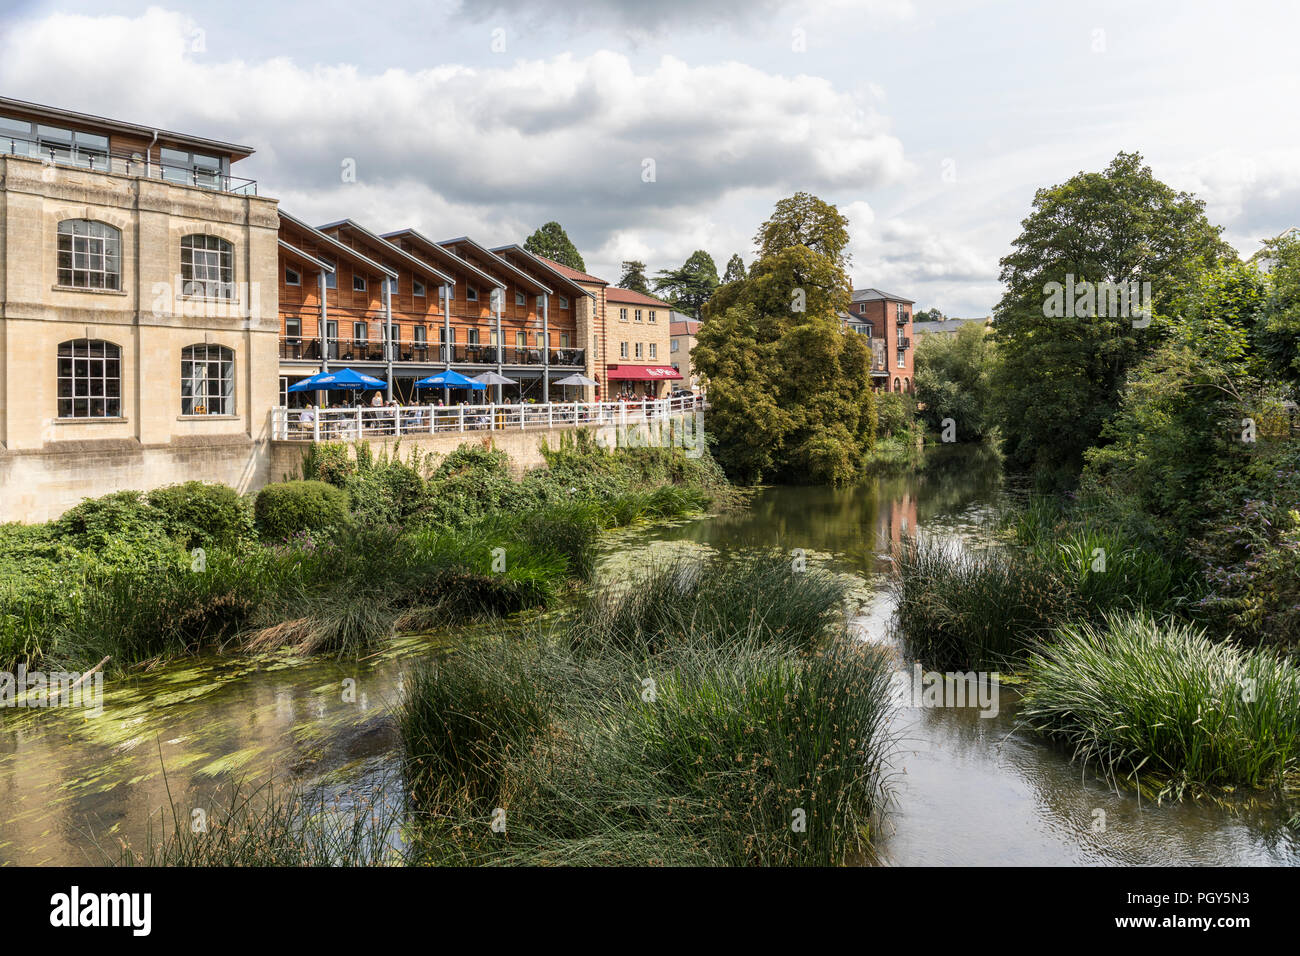 Historic town of Bradford on Avon picturing Kingston Mills and The Weaving Shed Restaurant. River Avon grasses due to low river level. Wiltshire, UK Stock Photo